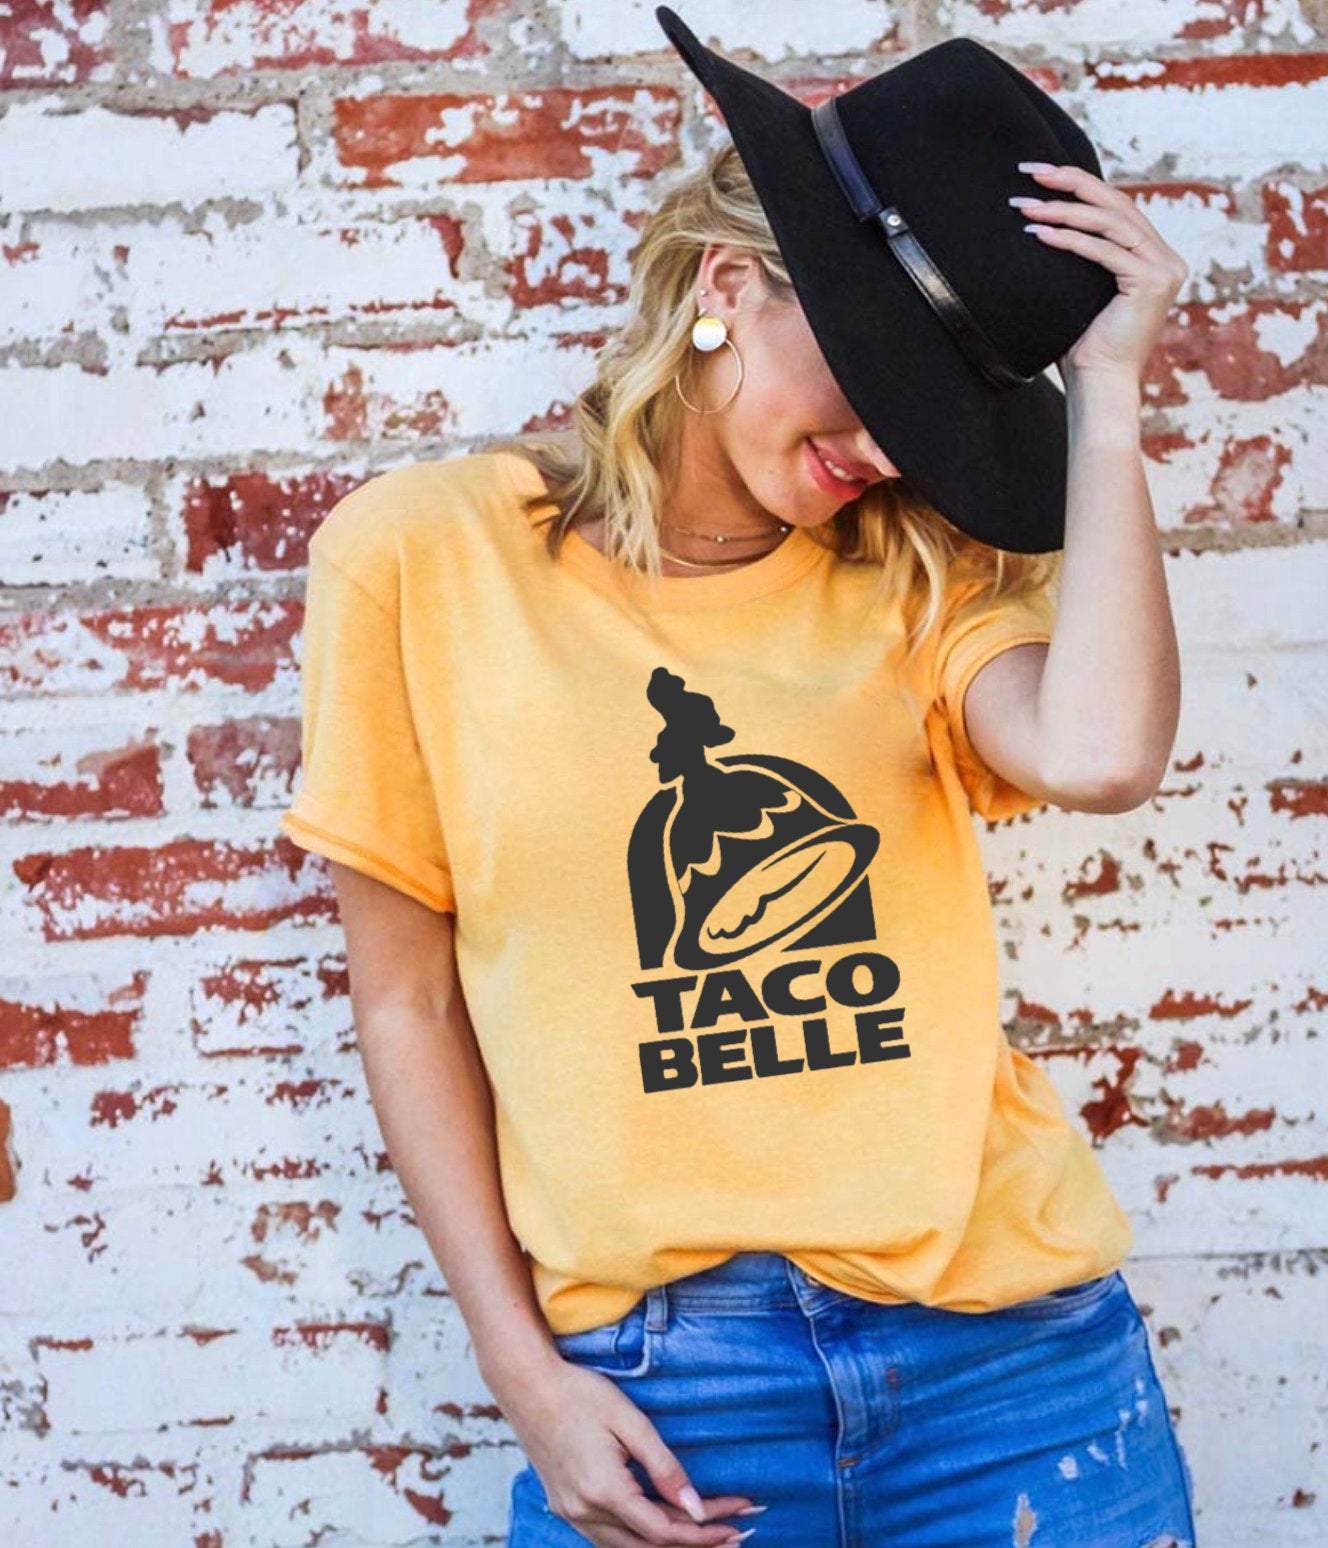 Taco Belle, Belle, Gift, Beauty And The Beast, Cinco De Mayo, Summer, Belle, Gift For Her, Graphic Tee, Taco Bell, Princess, Taco Tuesday,